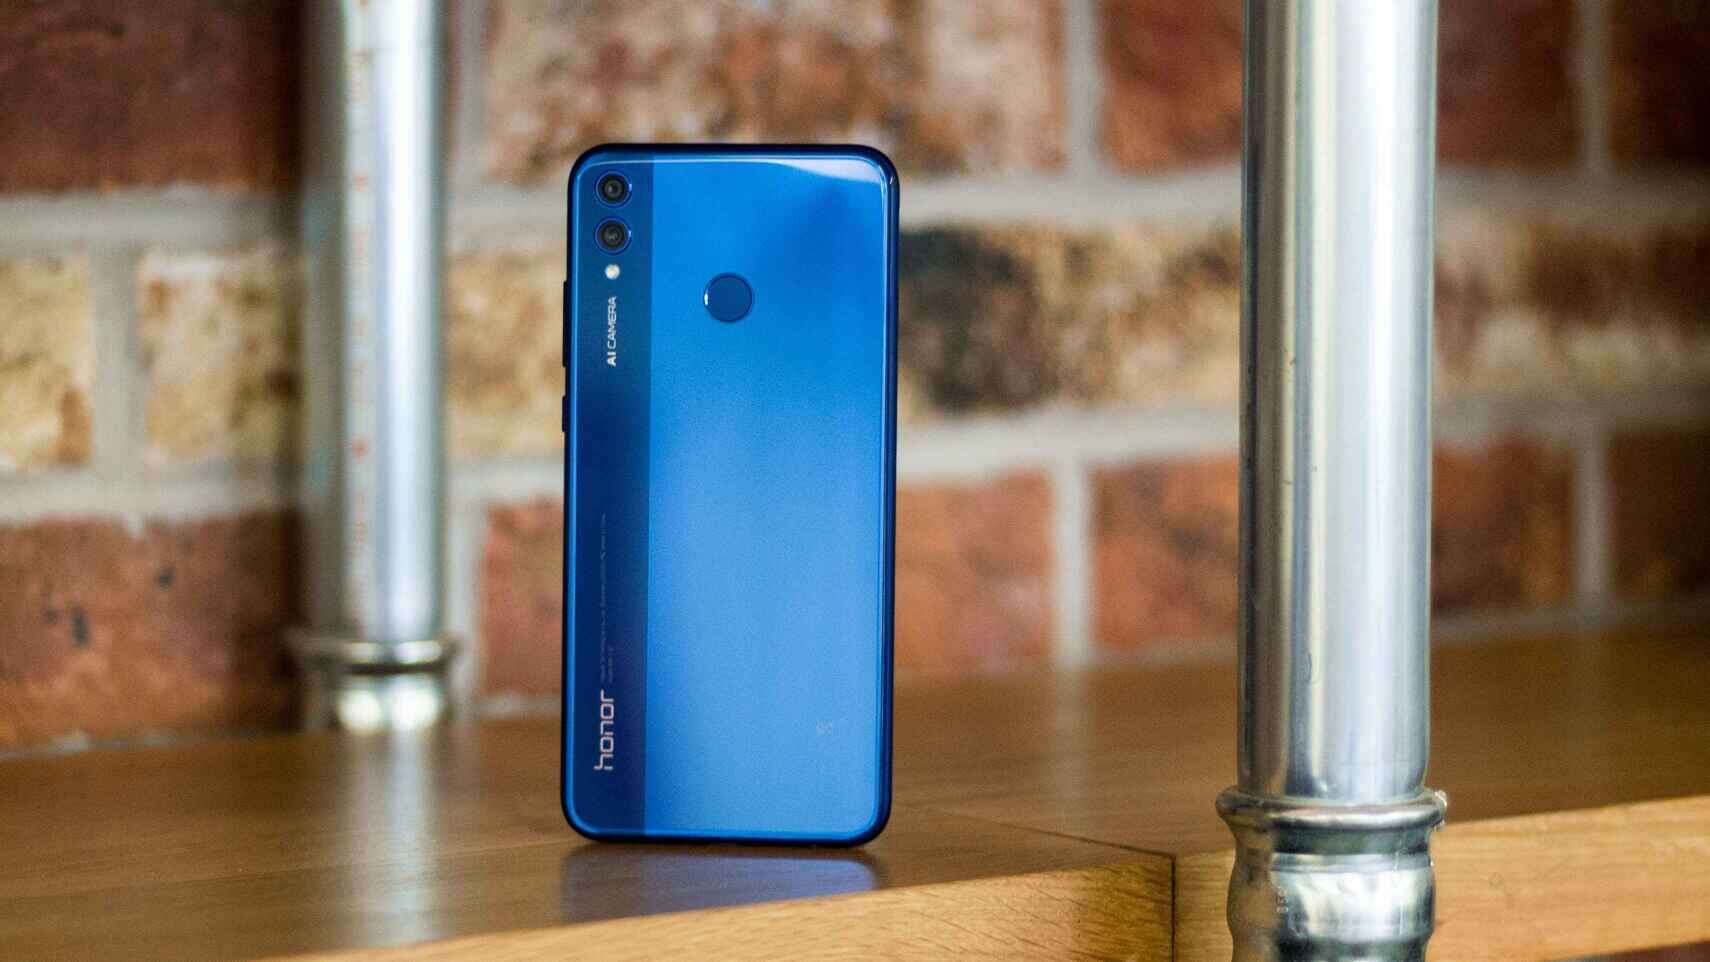 Honor 8X review: The fastest phone under £250